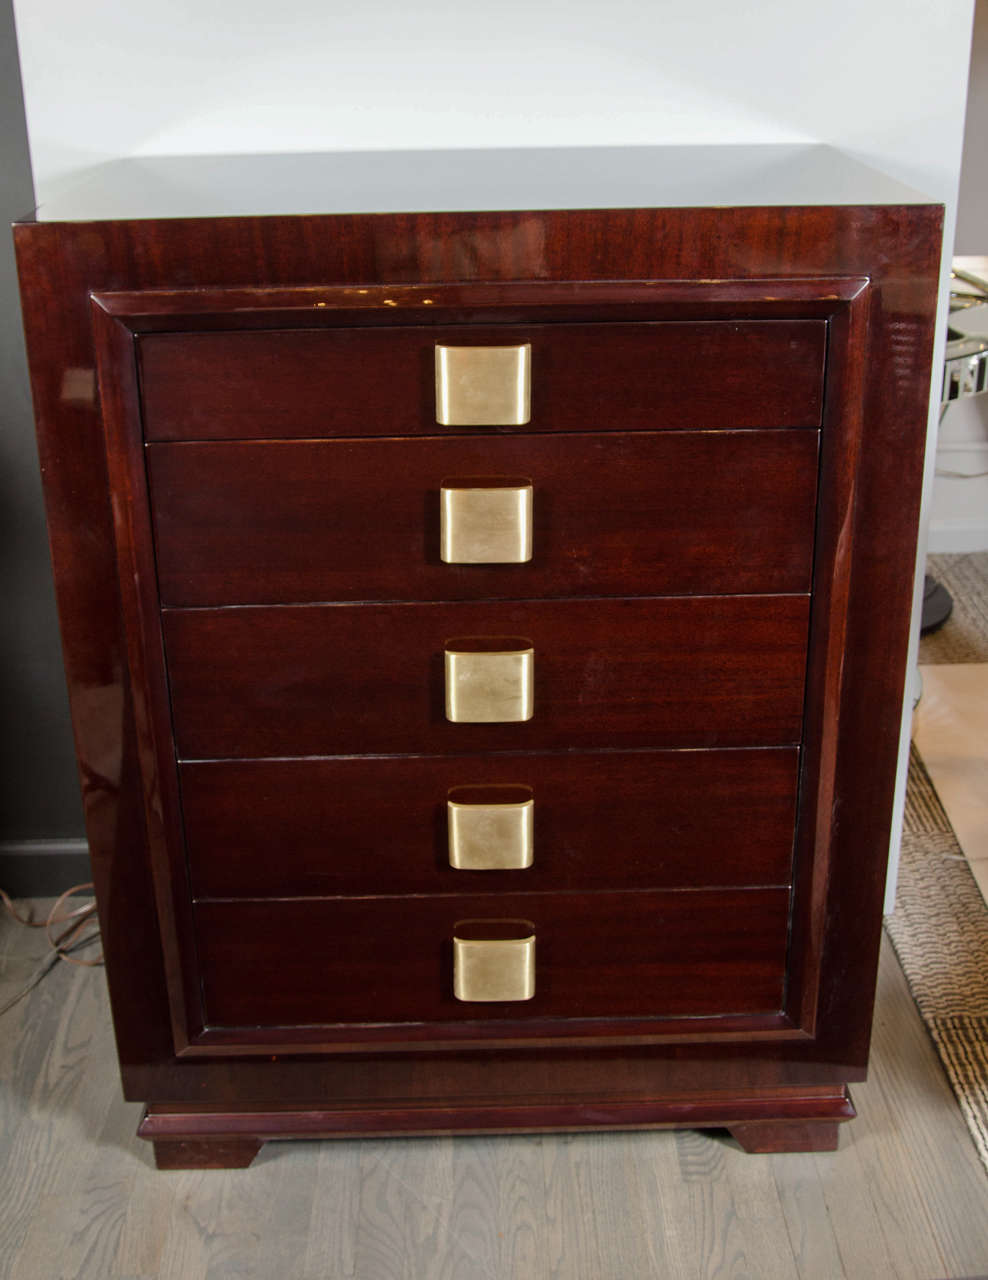 This sophisticated Mid-Century Modern high chest was realized in the United States, circa 1950. It offers an austere rectangular form in beautiful bookmatched mahogany with a total of five drawers, offering a wealth of storage possibilities. Each